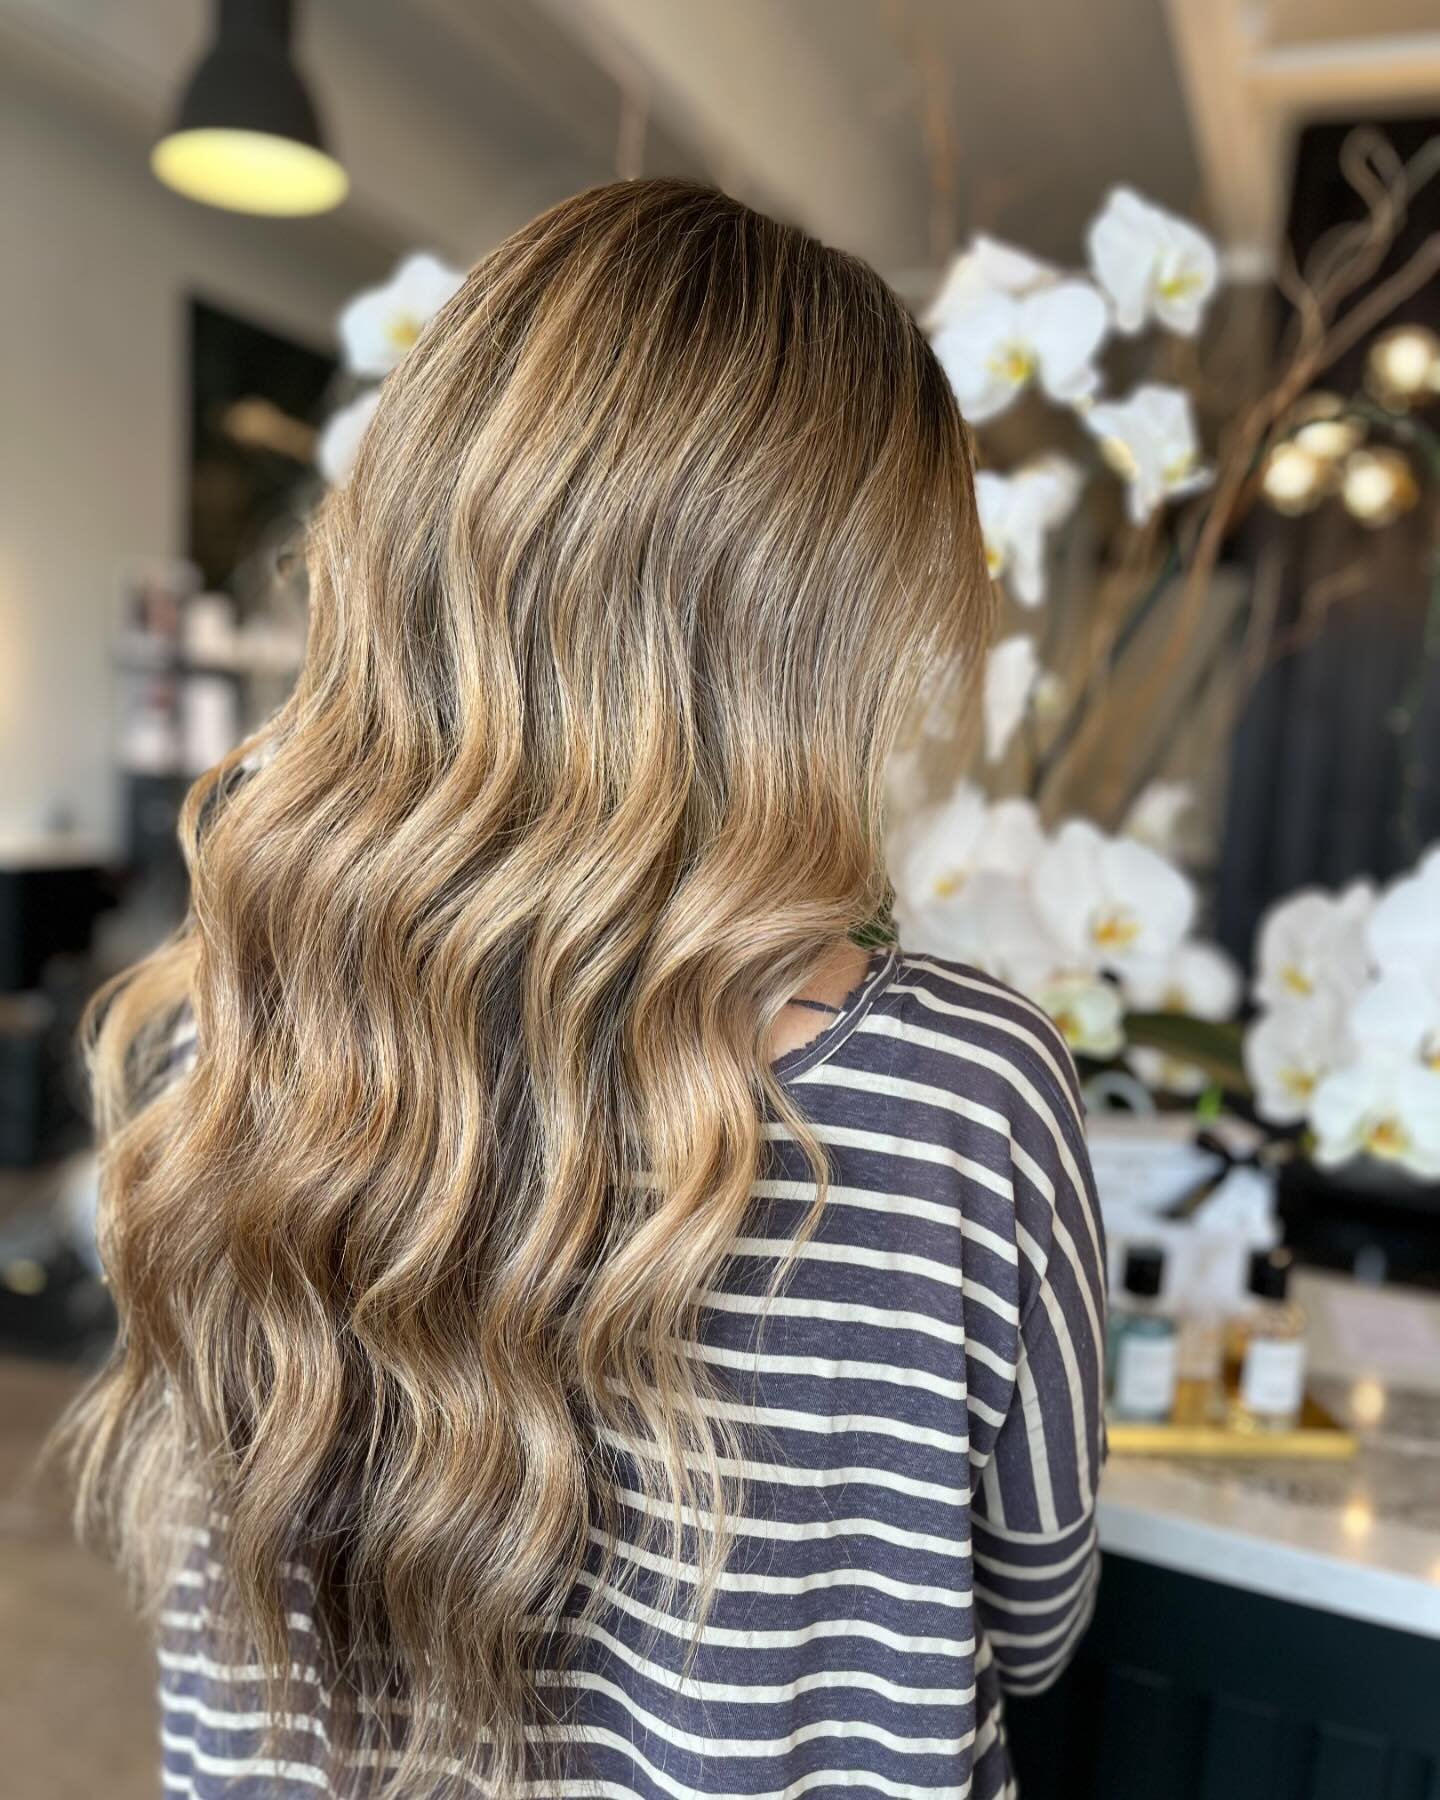 Swipe to see the stunning transformation by our stylist, Katrina! ✂️✨ From chic to sleek, Katrina knows how to add that sexy and sassy flair to your look. 

Ready for a change? Book your complimentary consultation with her today and let the magic beg